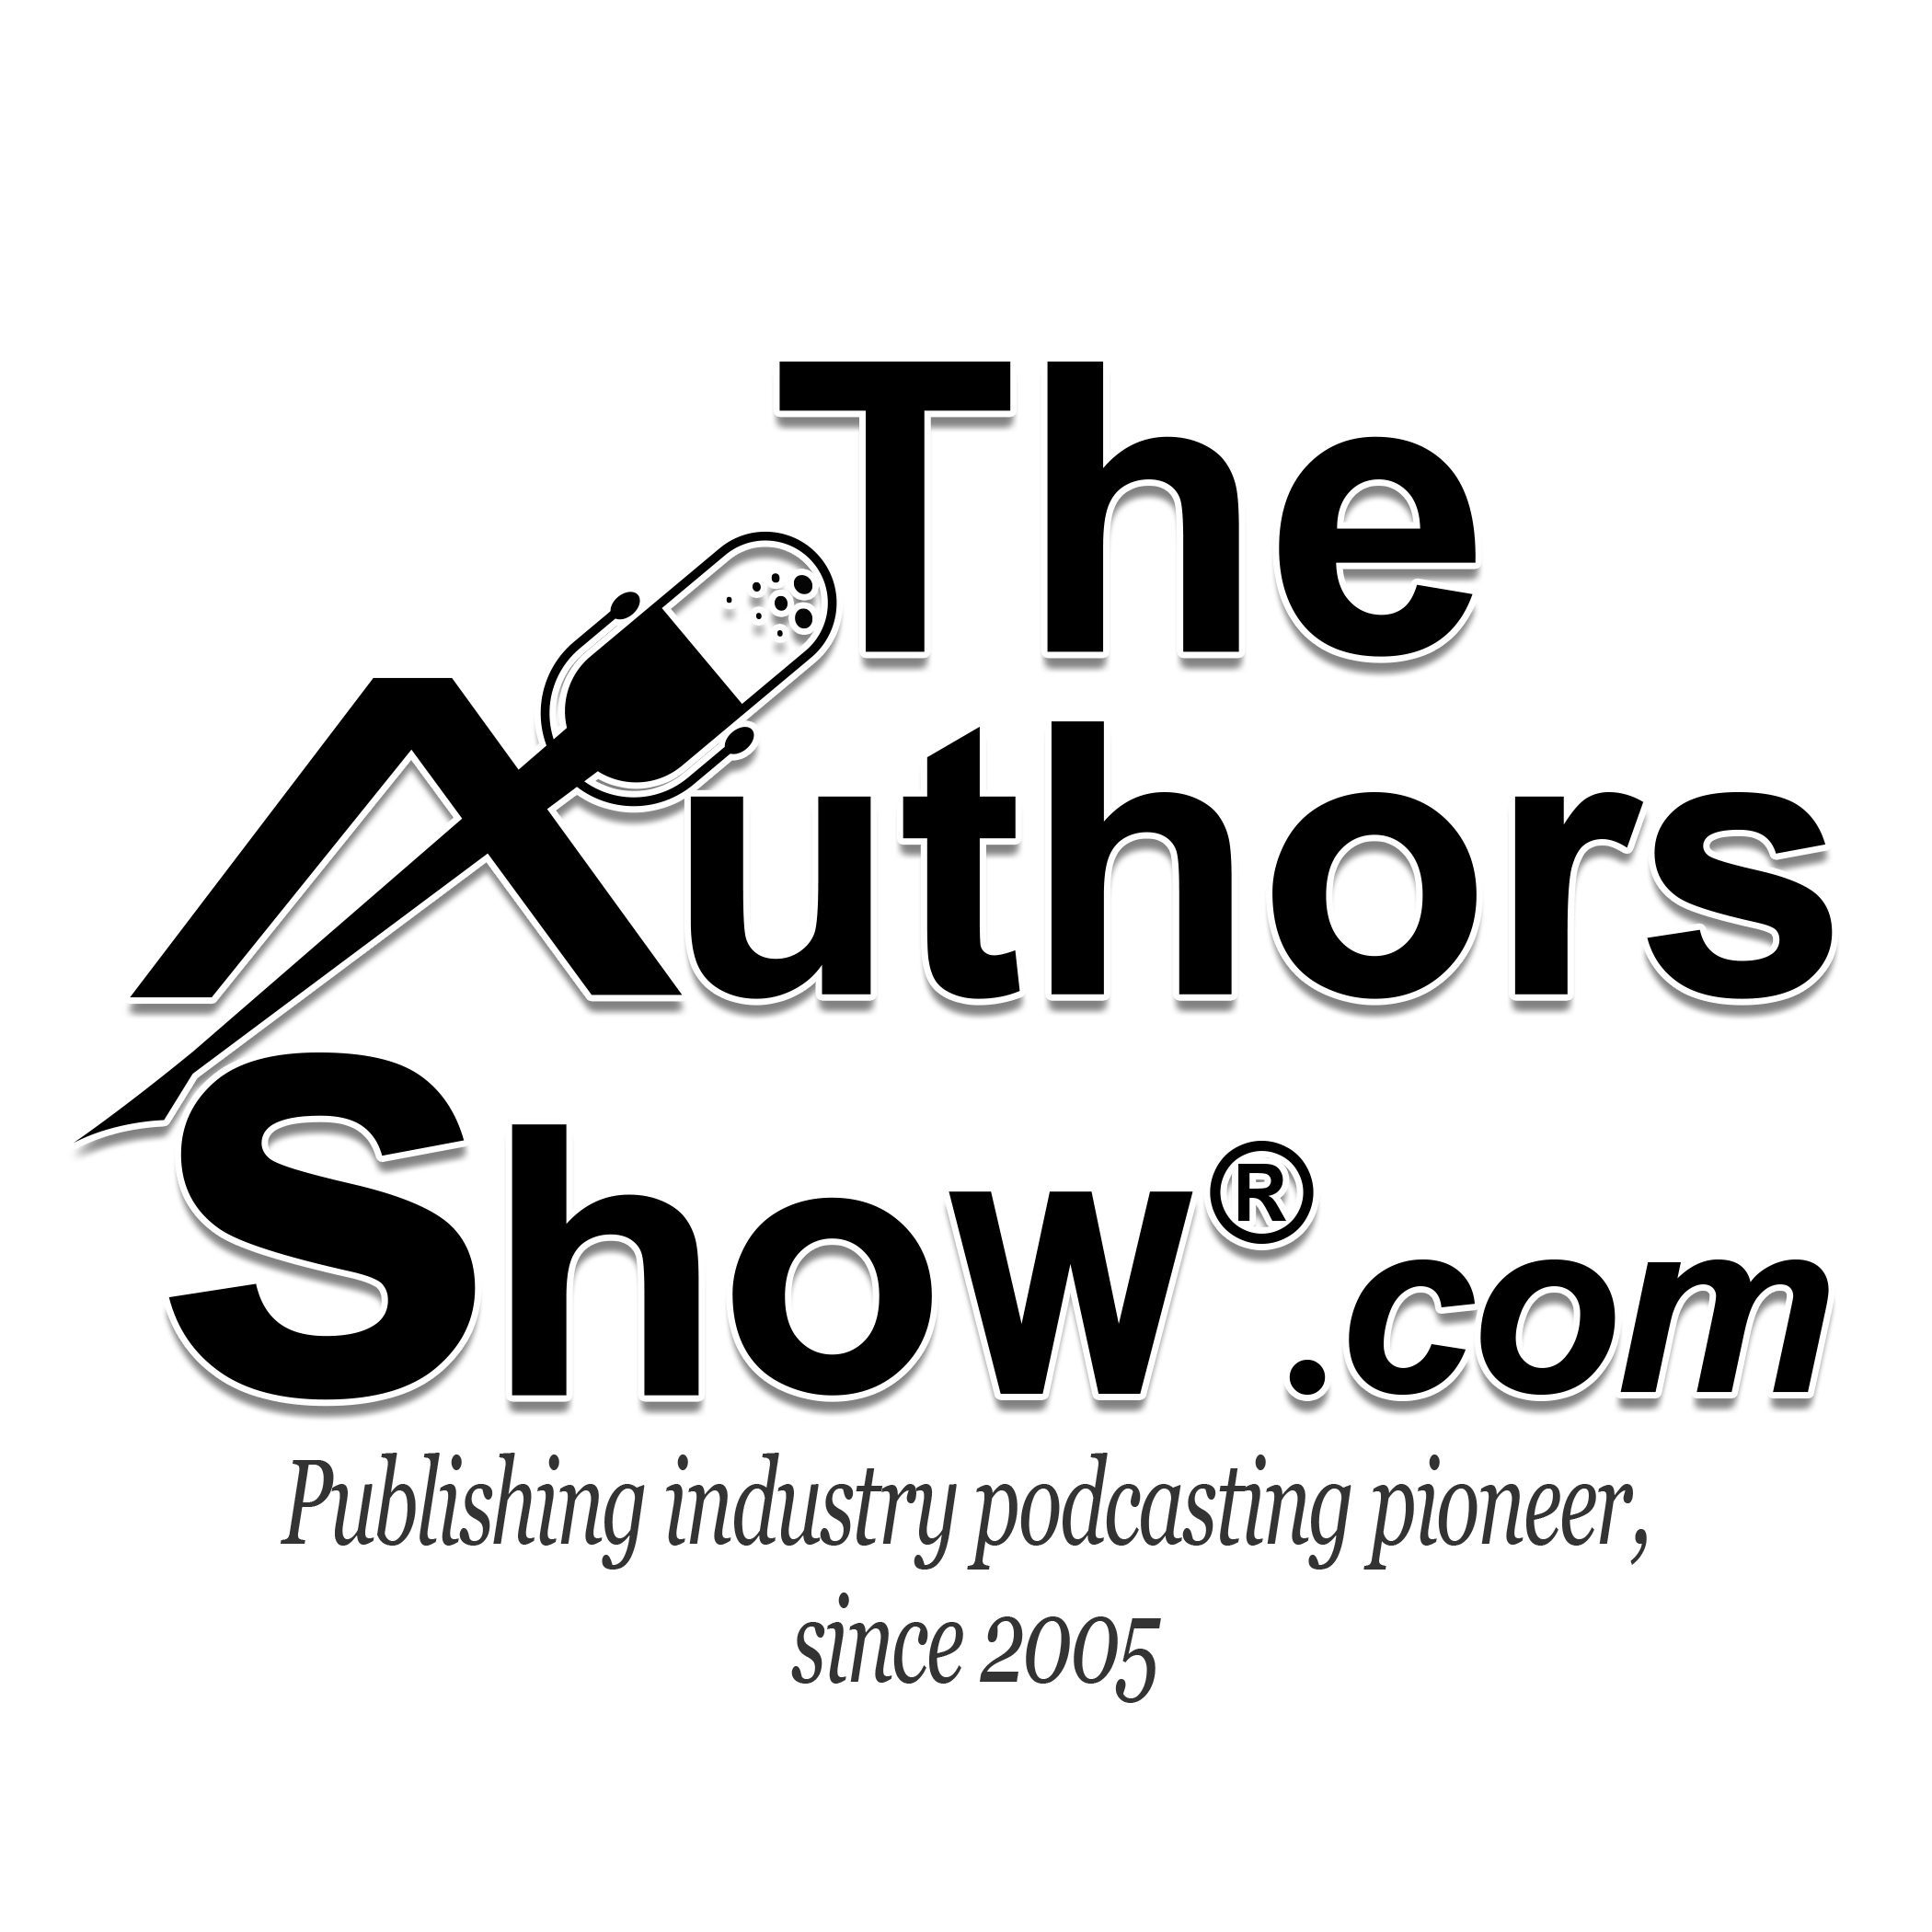 The Authors Show